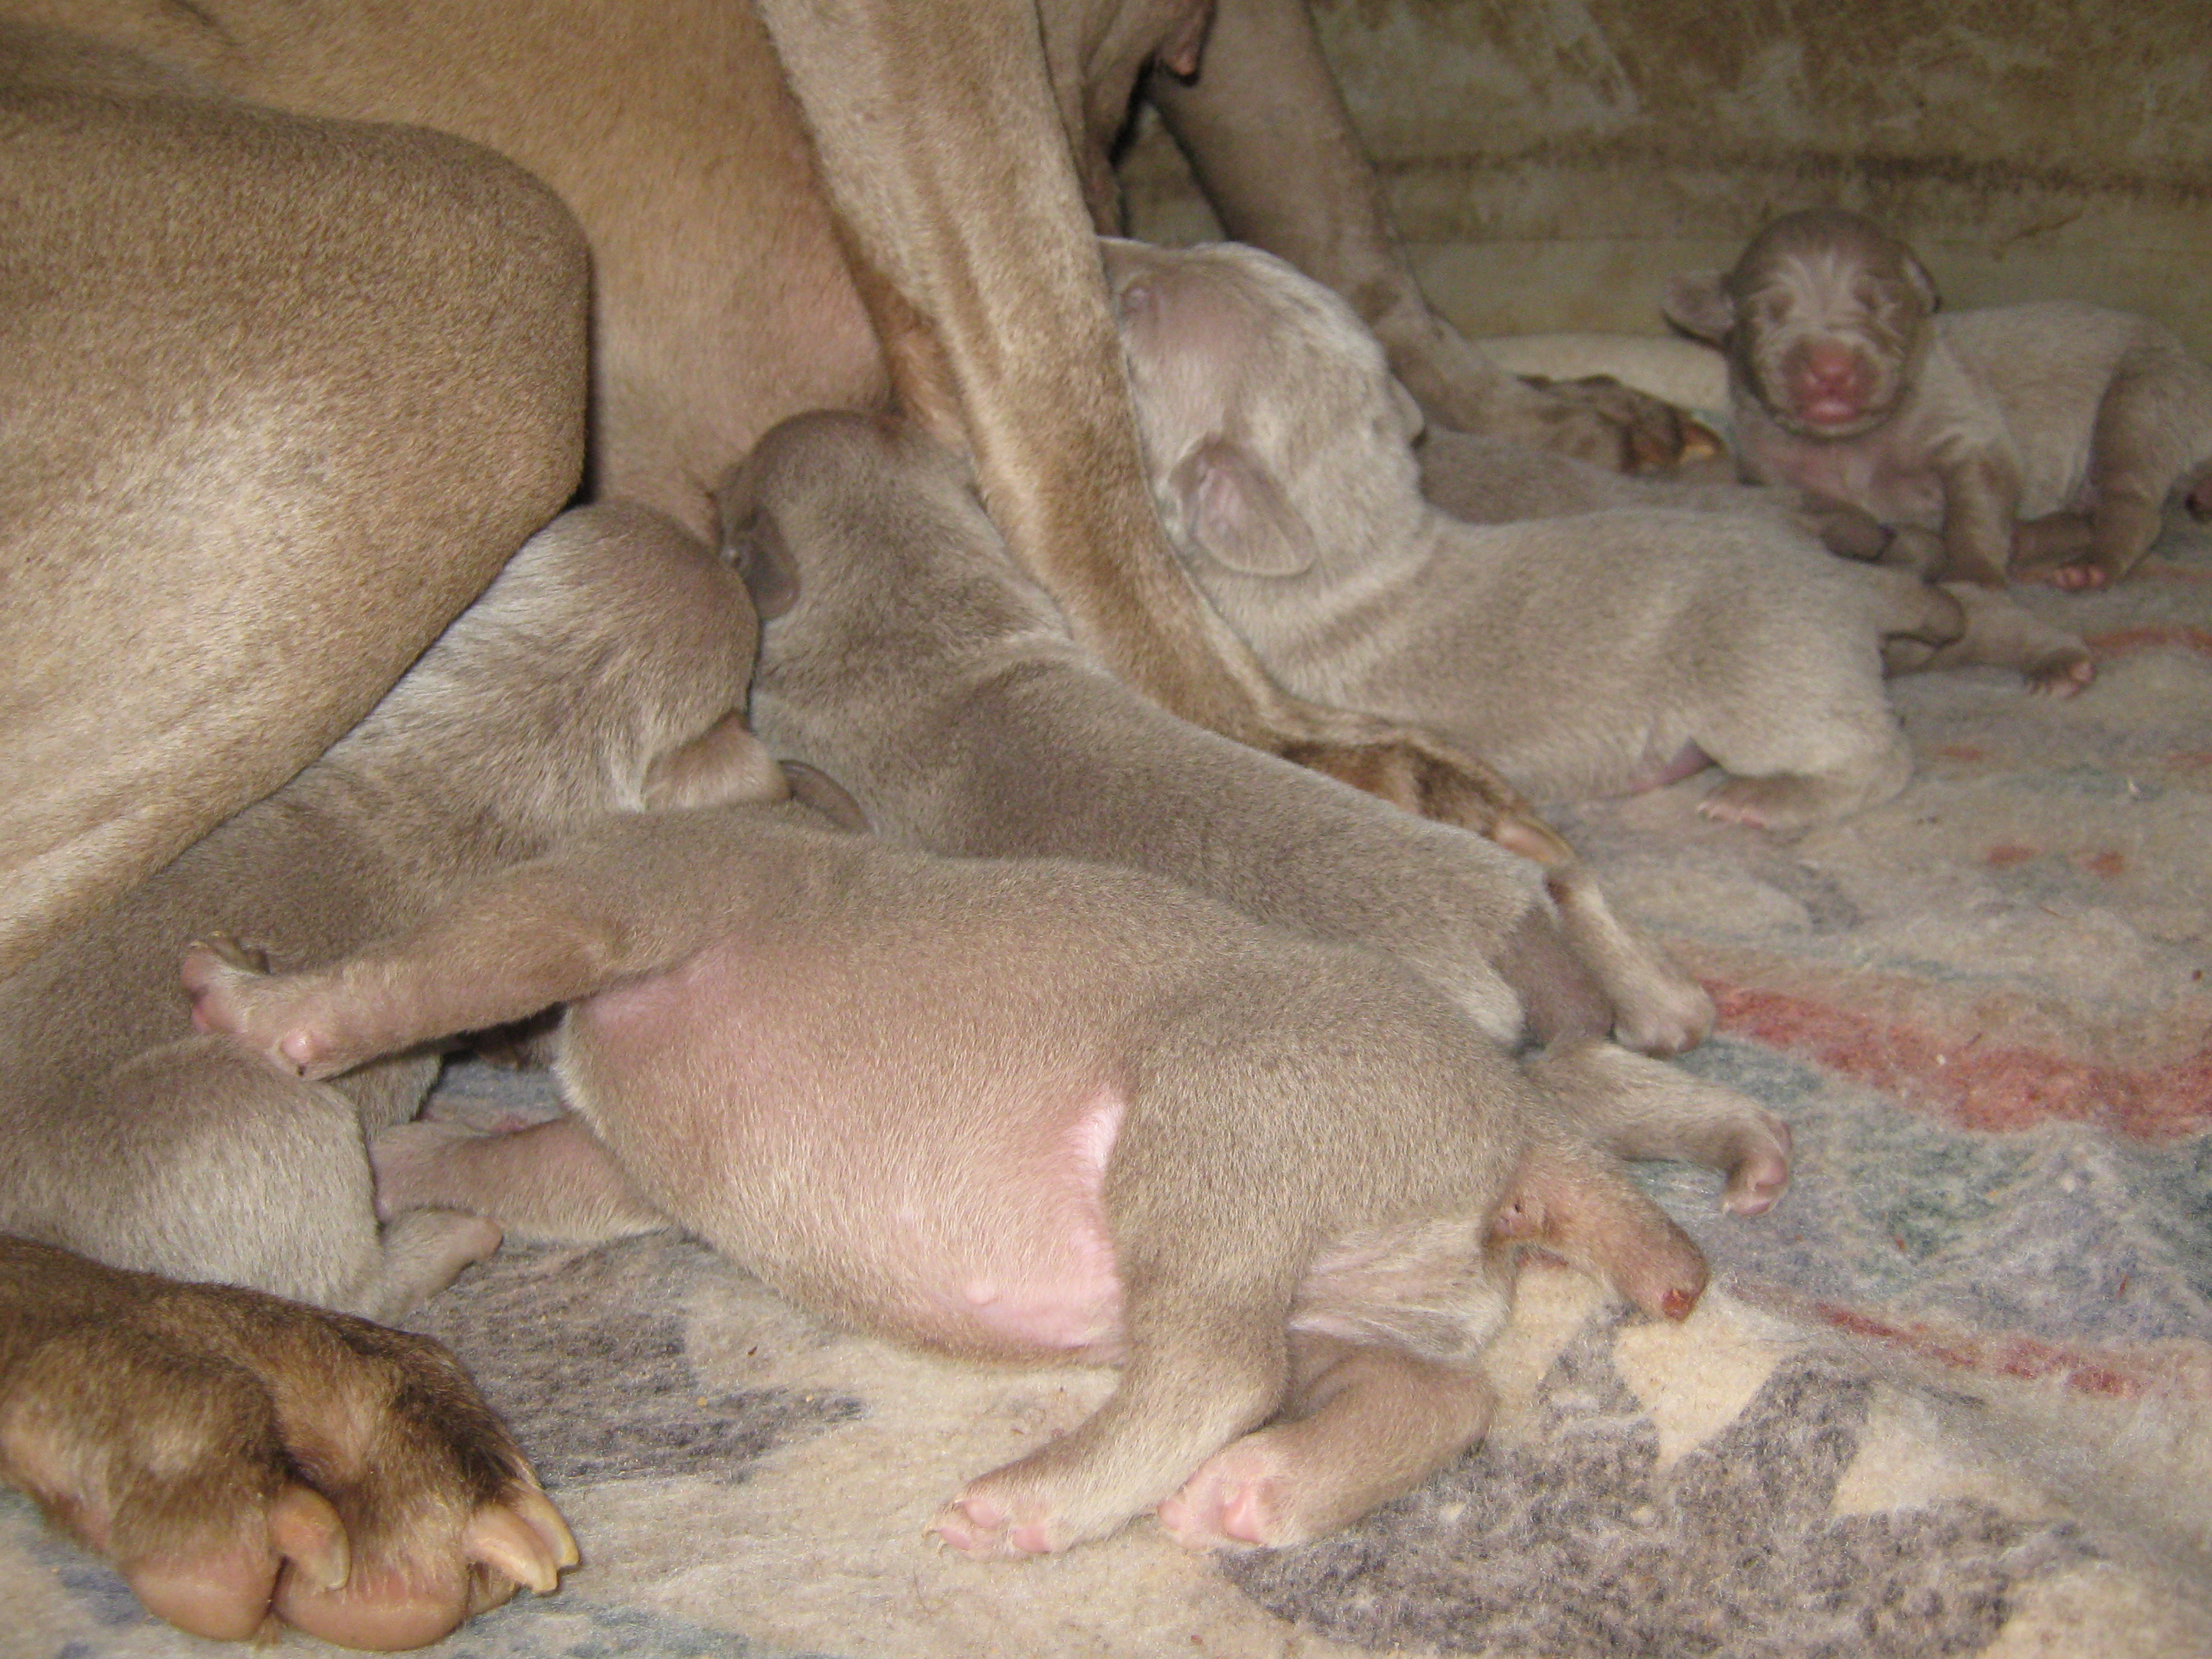 THIS IS NEW PICTURES OF PUPS AT 2 WEEKS OLD    THEY GROW SO FAST   ITS AMAZING